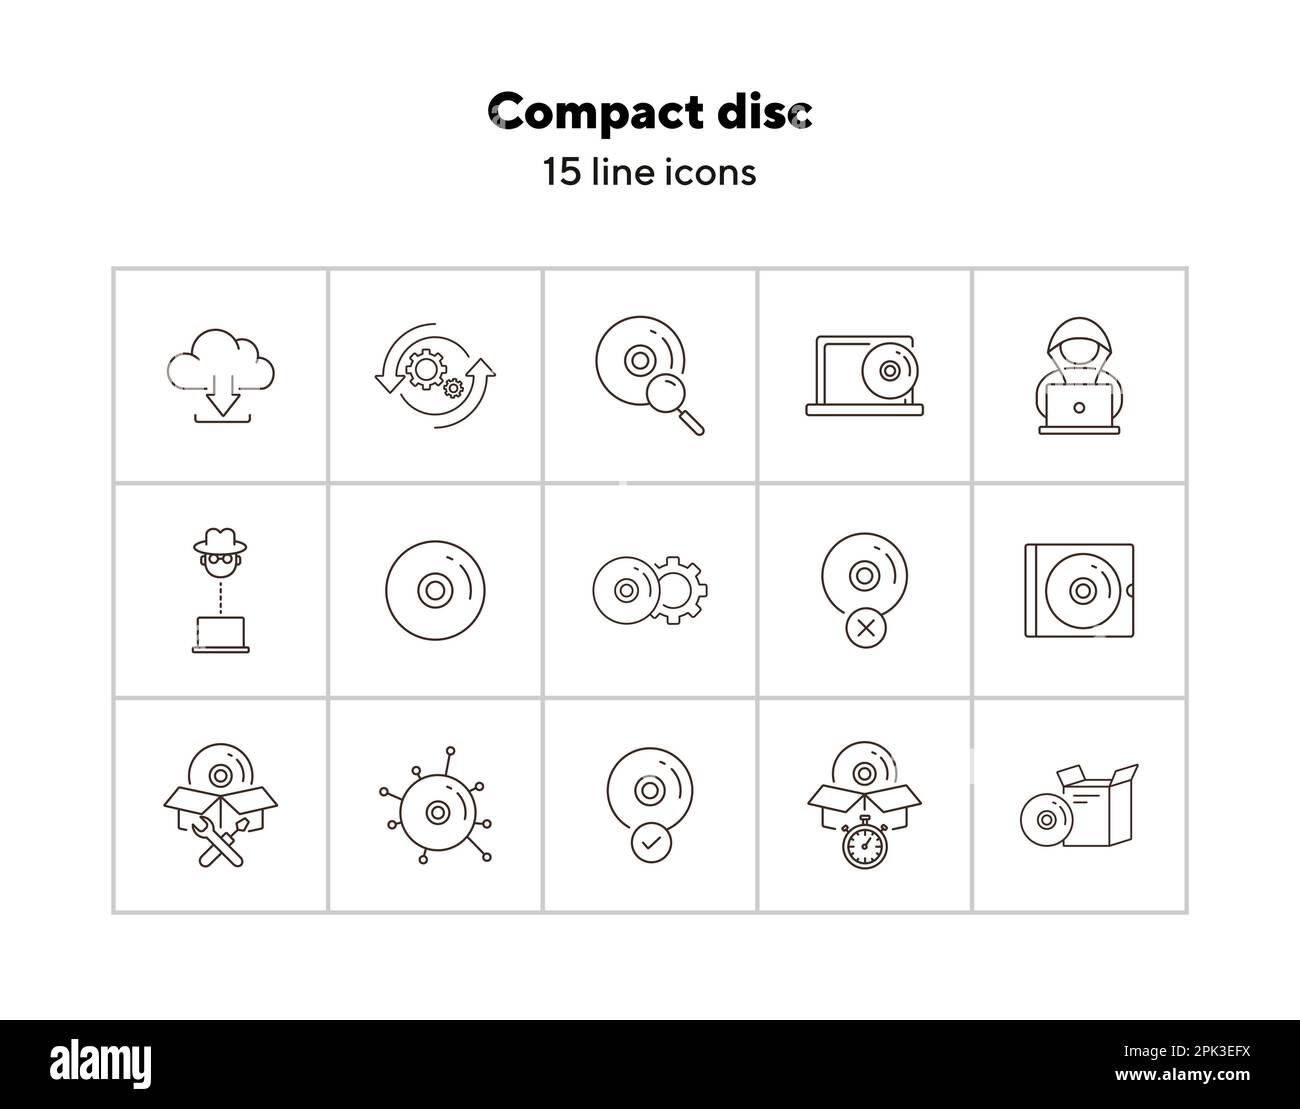 Compact disc icons Stock Vector